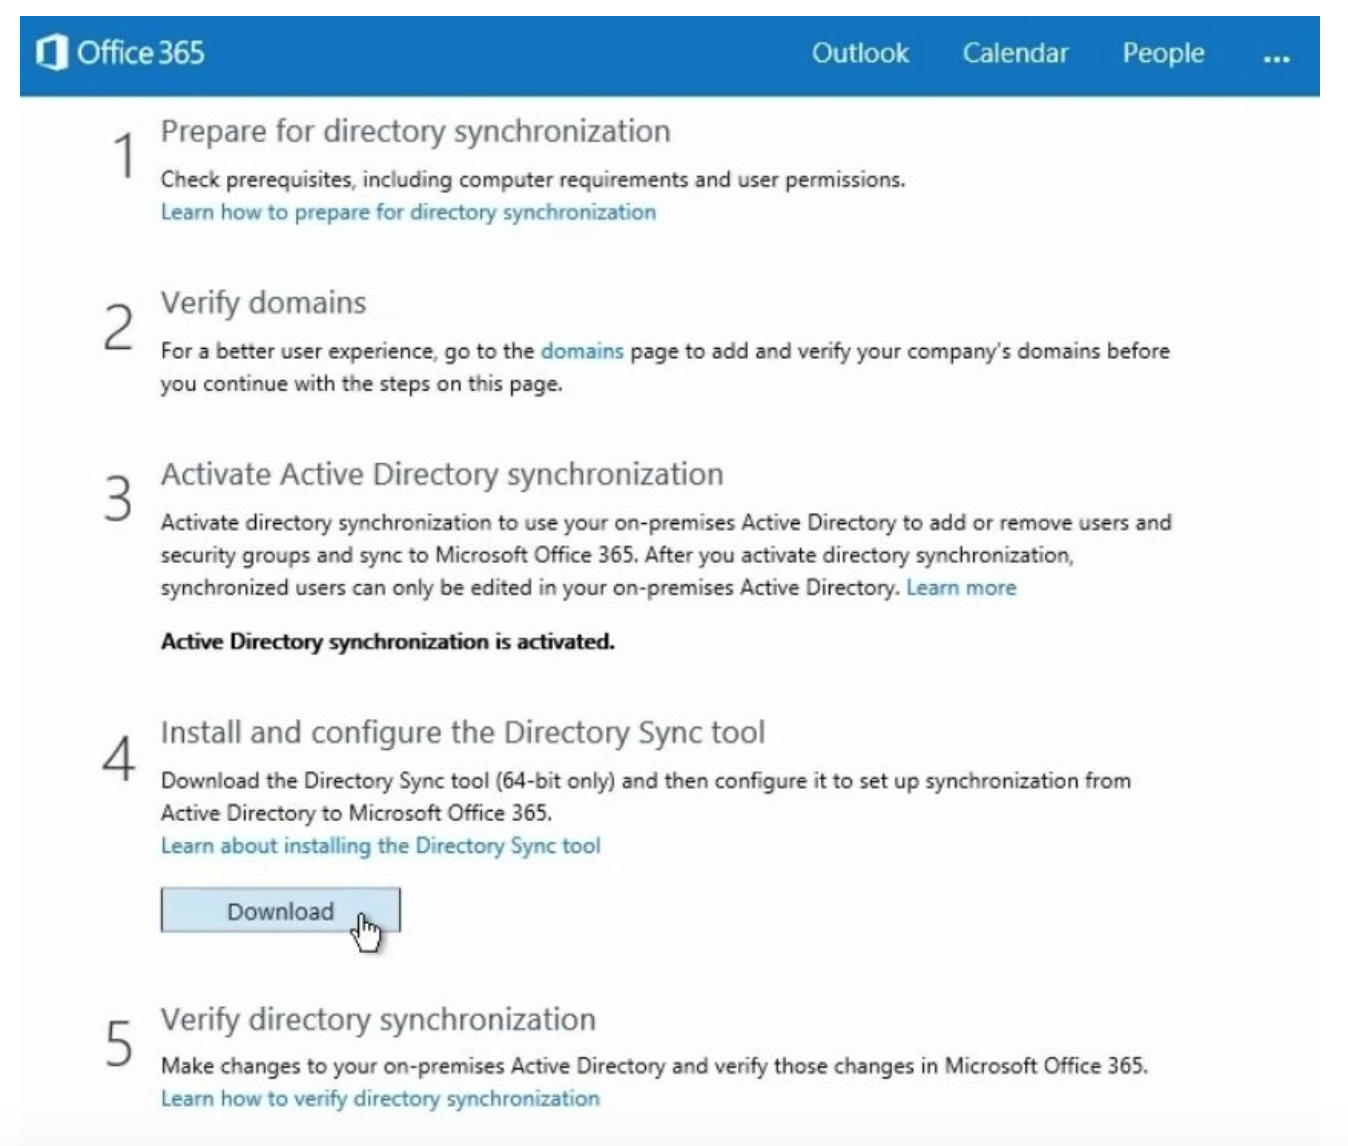 Download Directory Sync tool